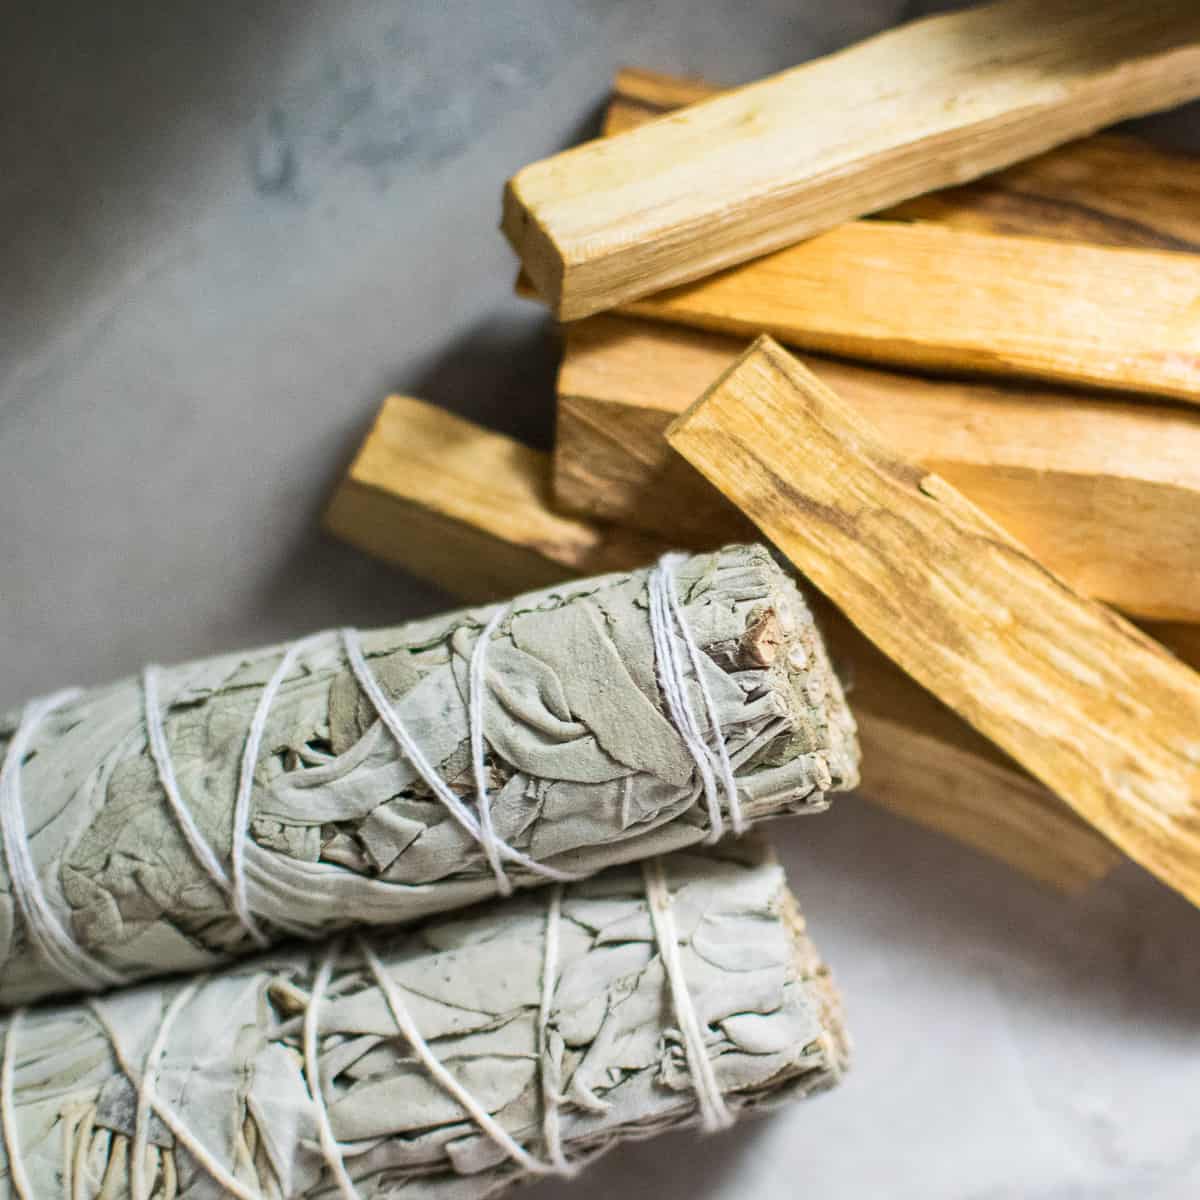 Bundles of sage and a stack of palo santo pieces.